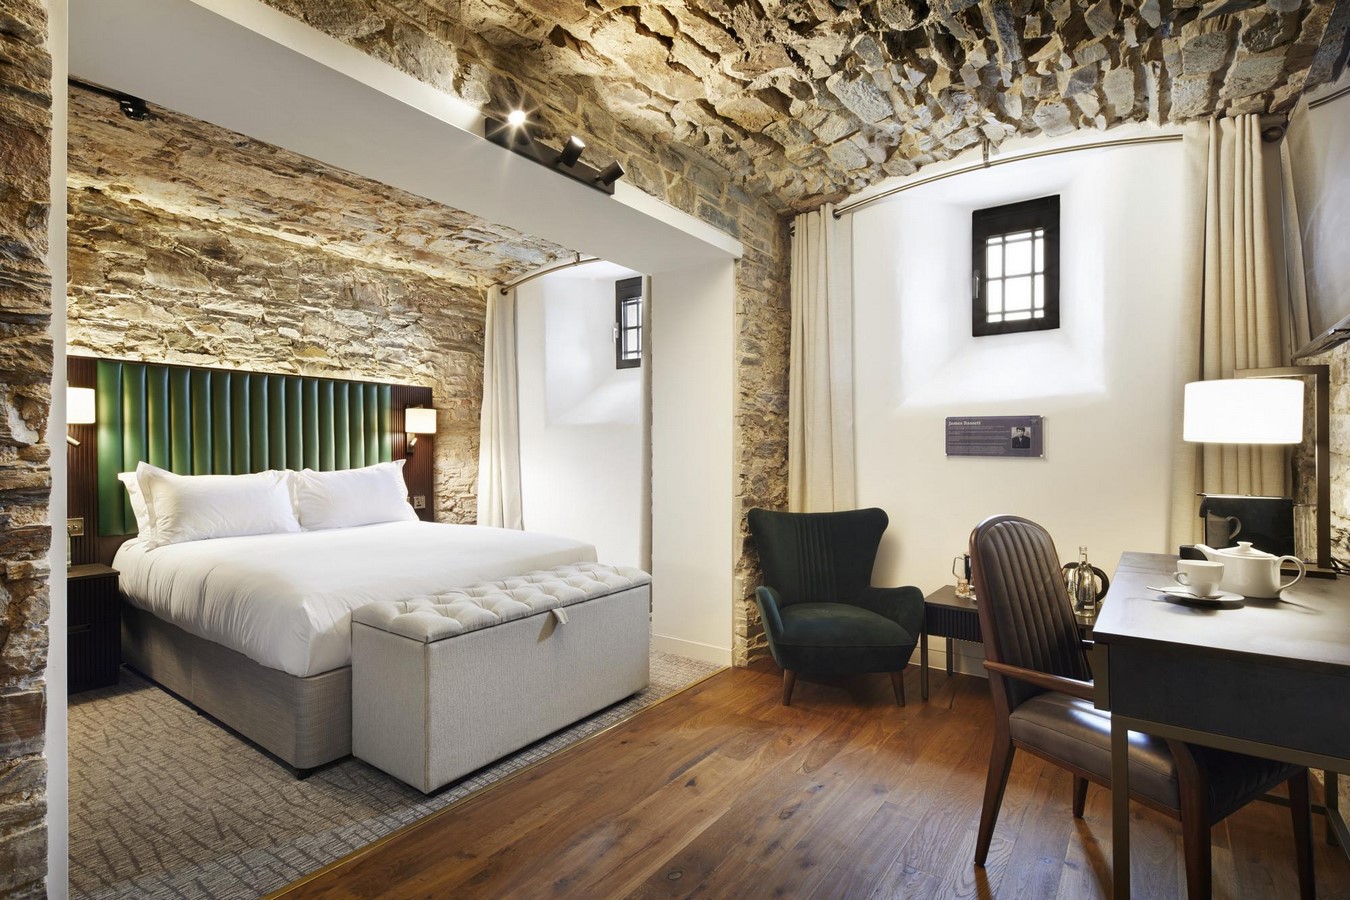 Bodmin Jail Hotel and Visitor Attraction by Twelve Architects - Sheet5